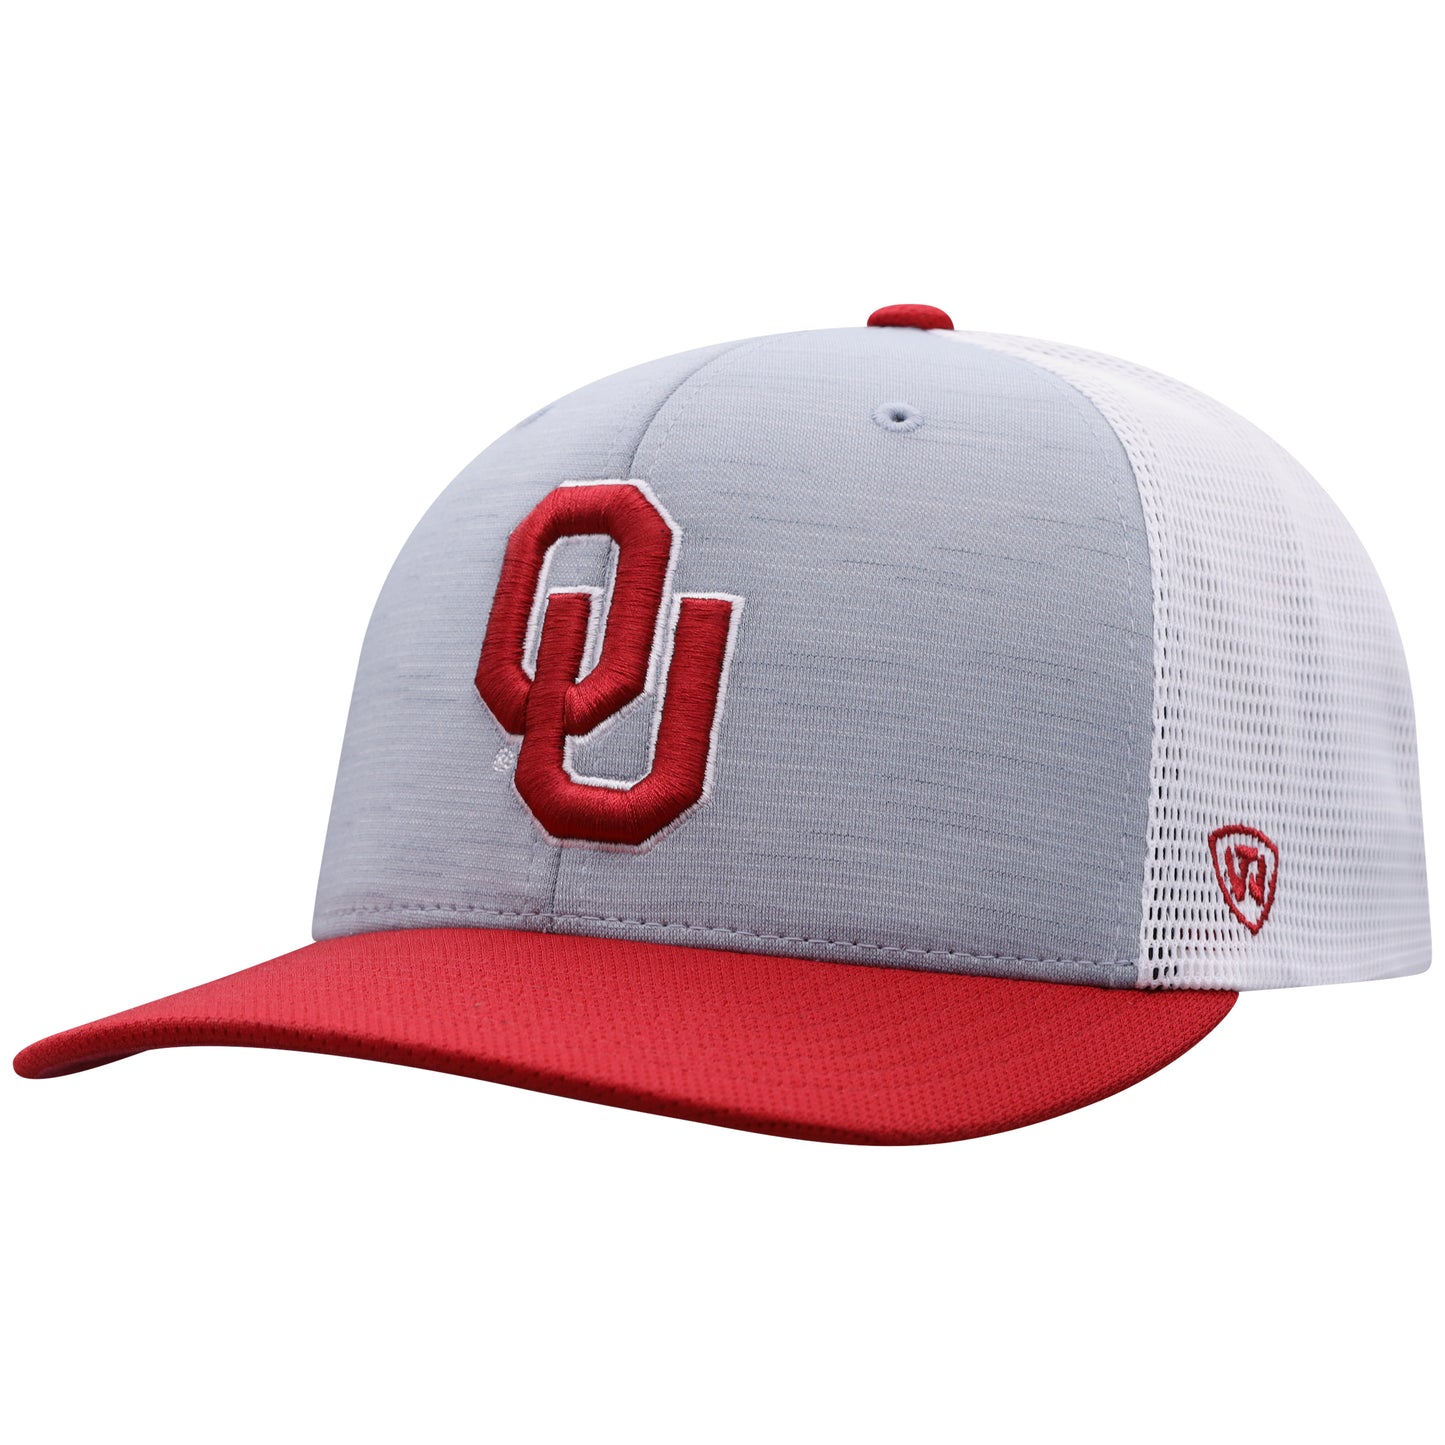 Men's Oklahoma Sooners Stamp 3-Tone Flex Fit Hat By Top Of the World